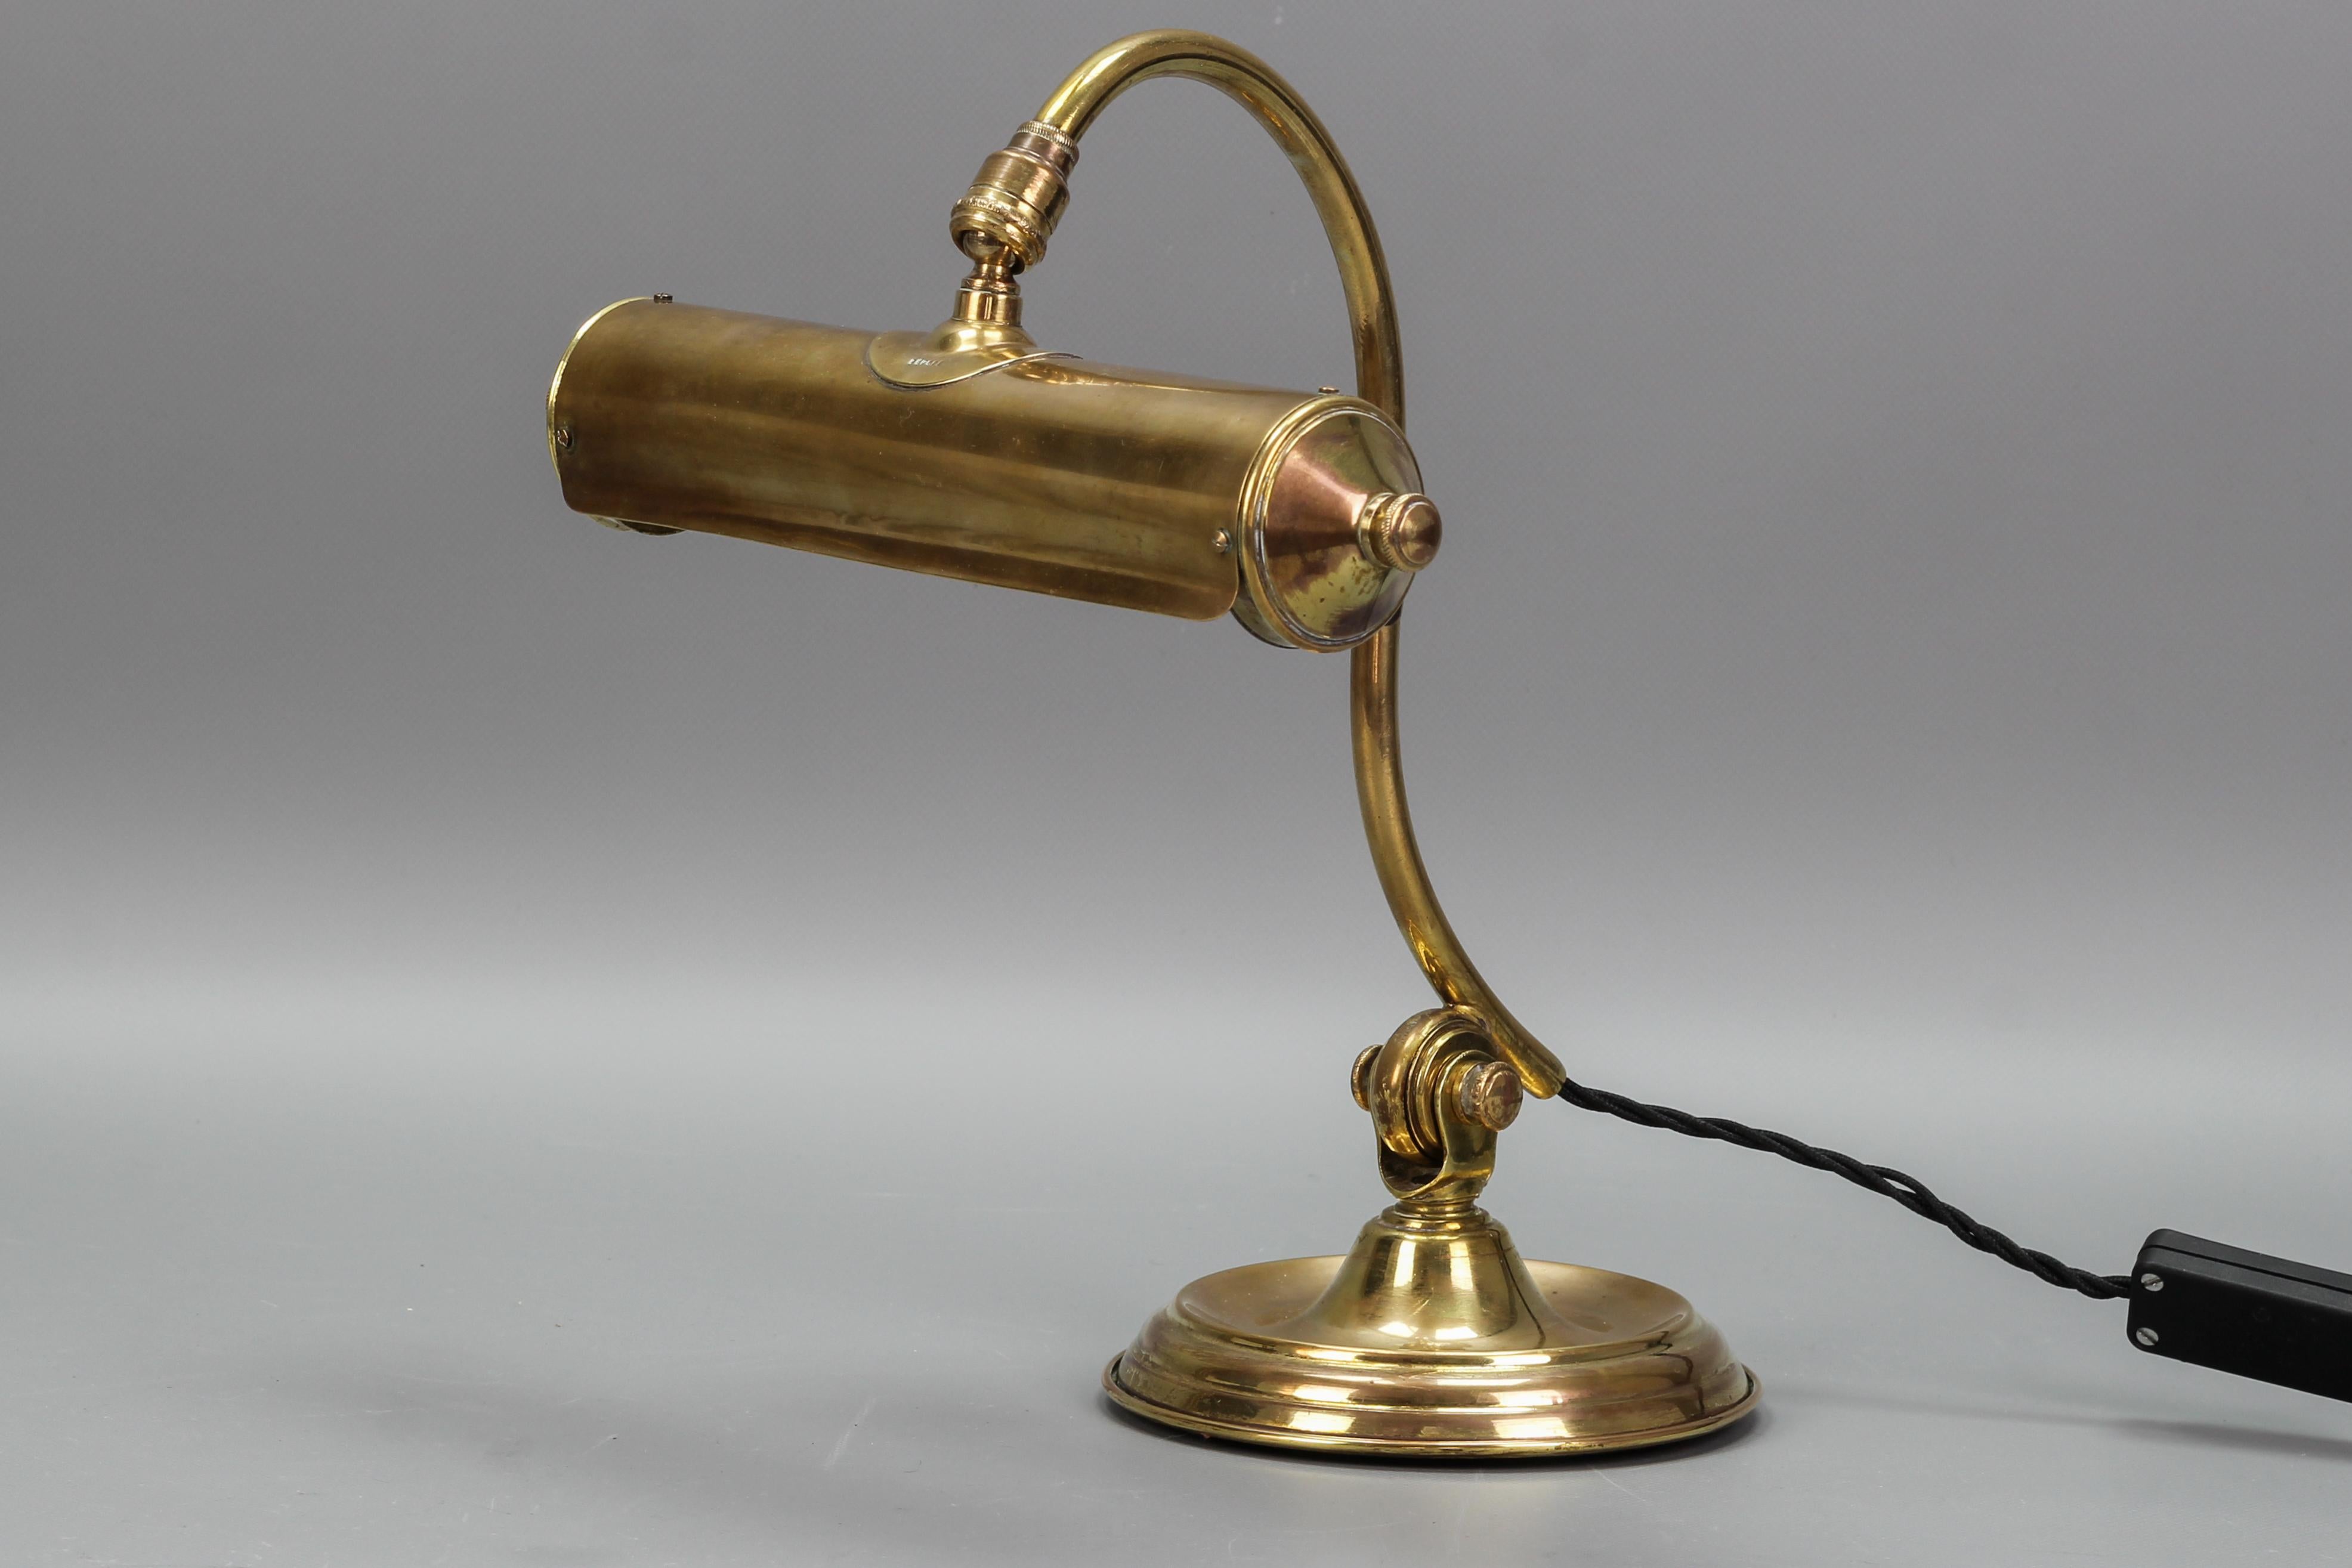 French brass Adjustable Desk Lamp, circa the 1930s
The beautiful cylindrical shaped shade of the banker's or piano Art Deco desk lamp is mounted on an adjustable swan neck support arm, attached to a circular weighted brass and metal base.
One new